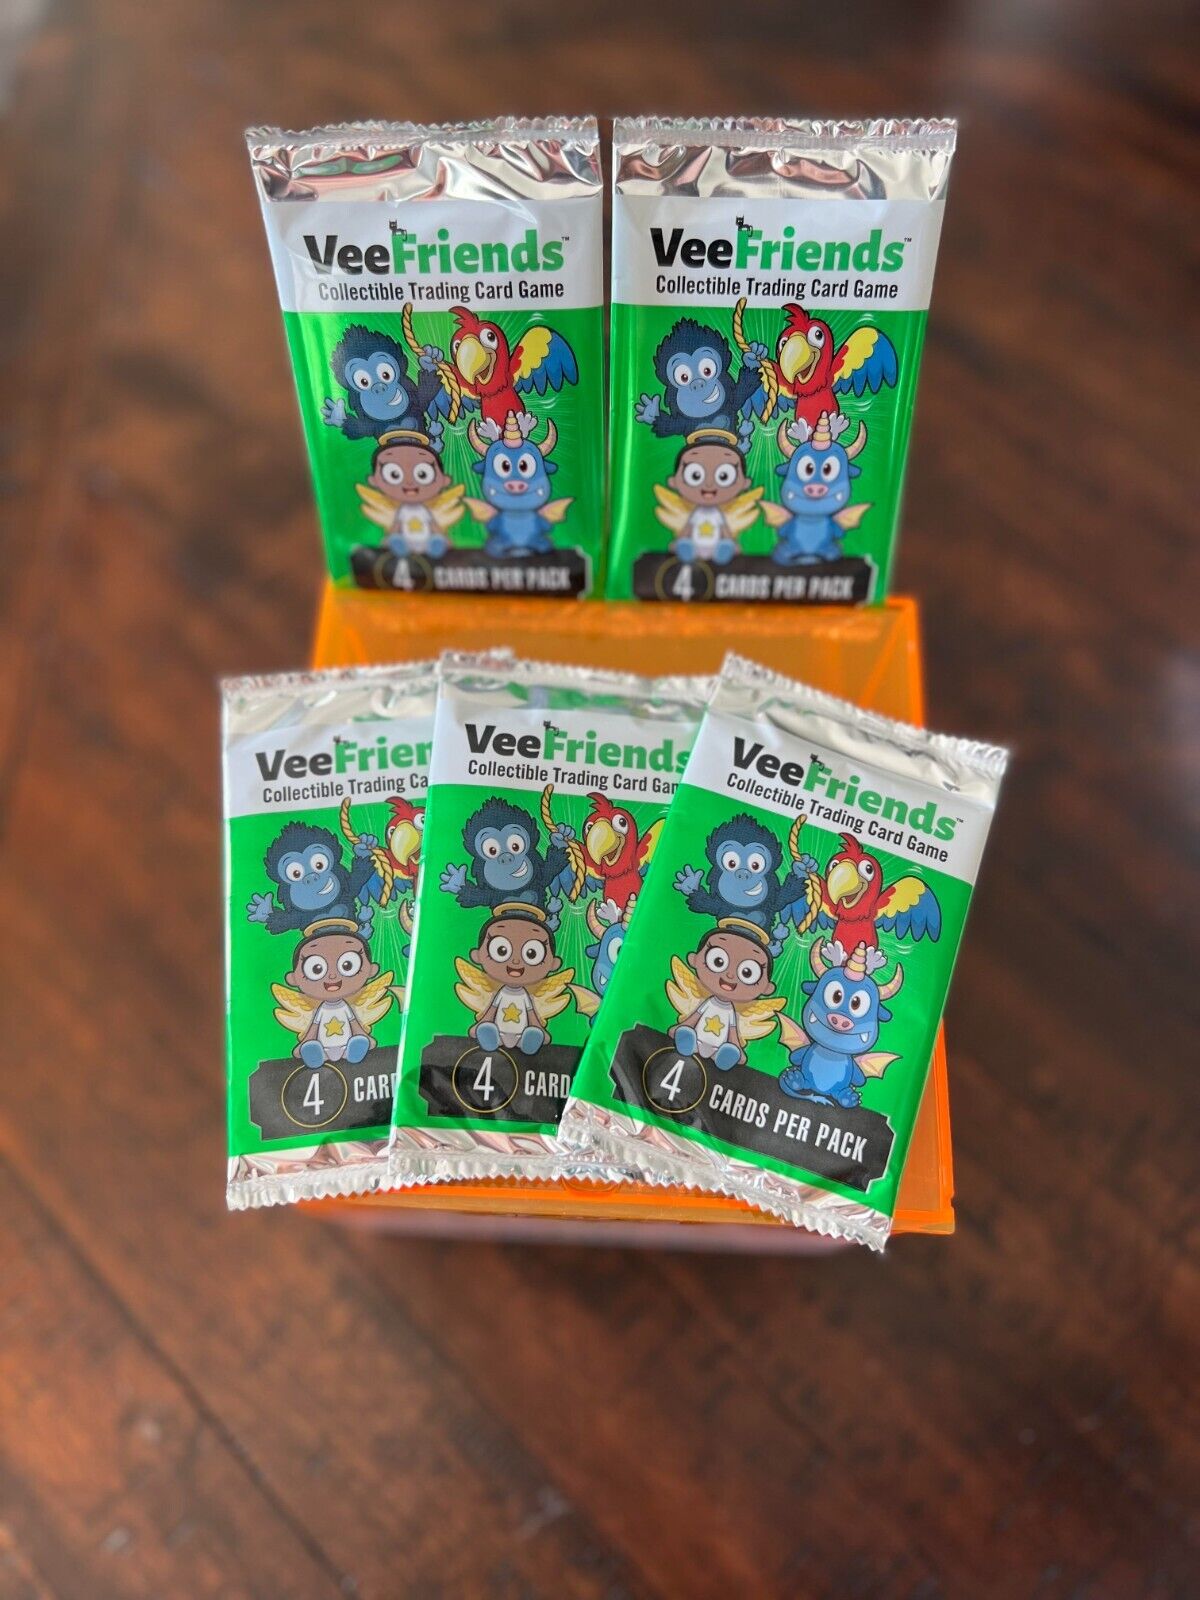 Veefriends Series 2 Trading Cards Compete And Collect (1 Pack) from ZeroCool Box